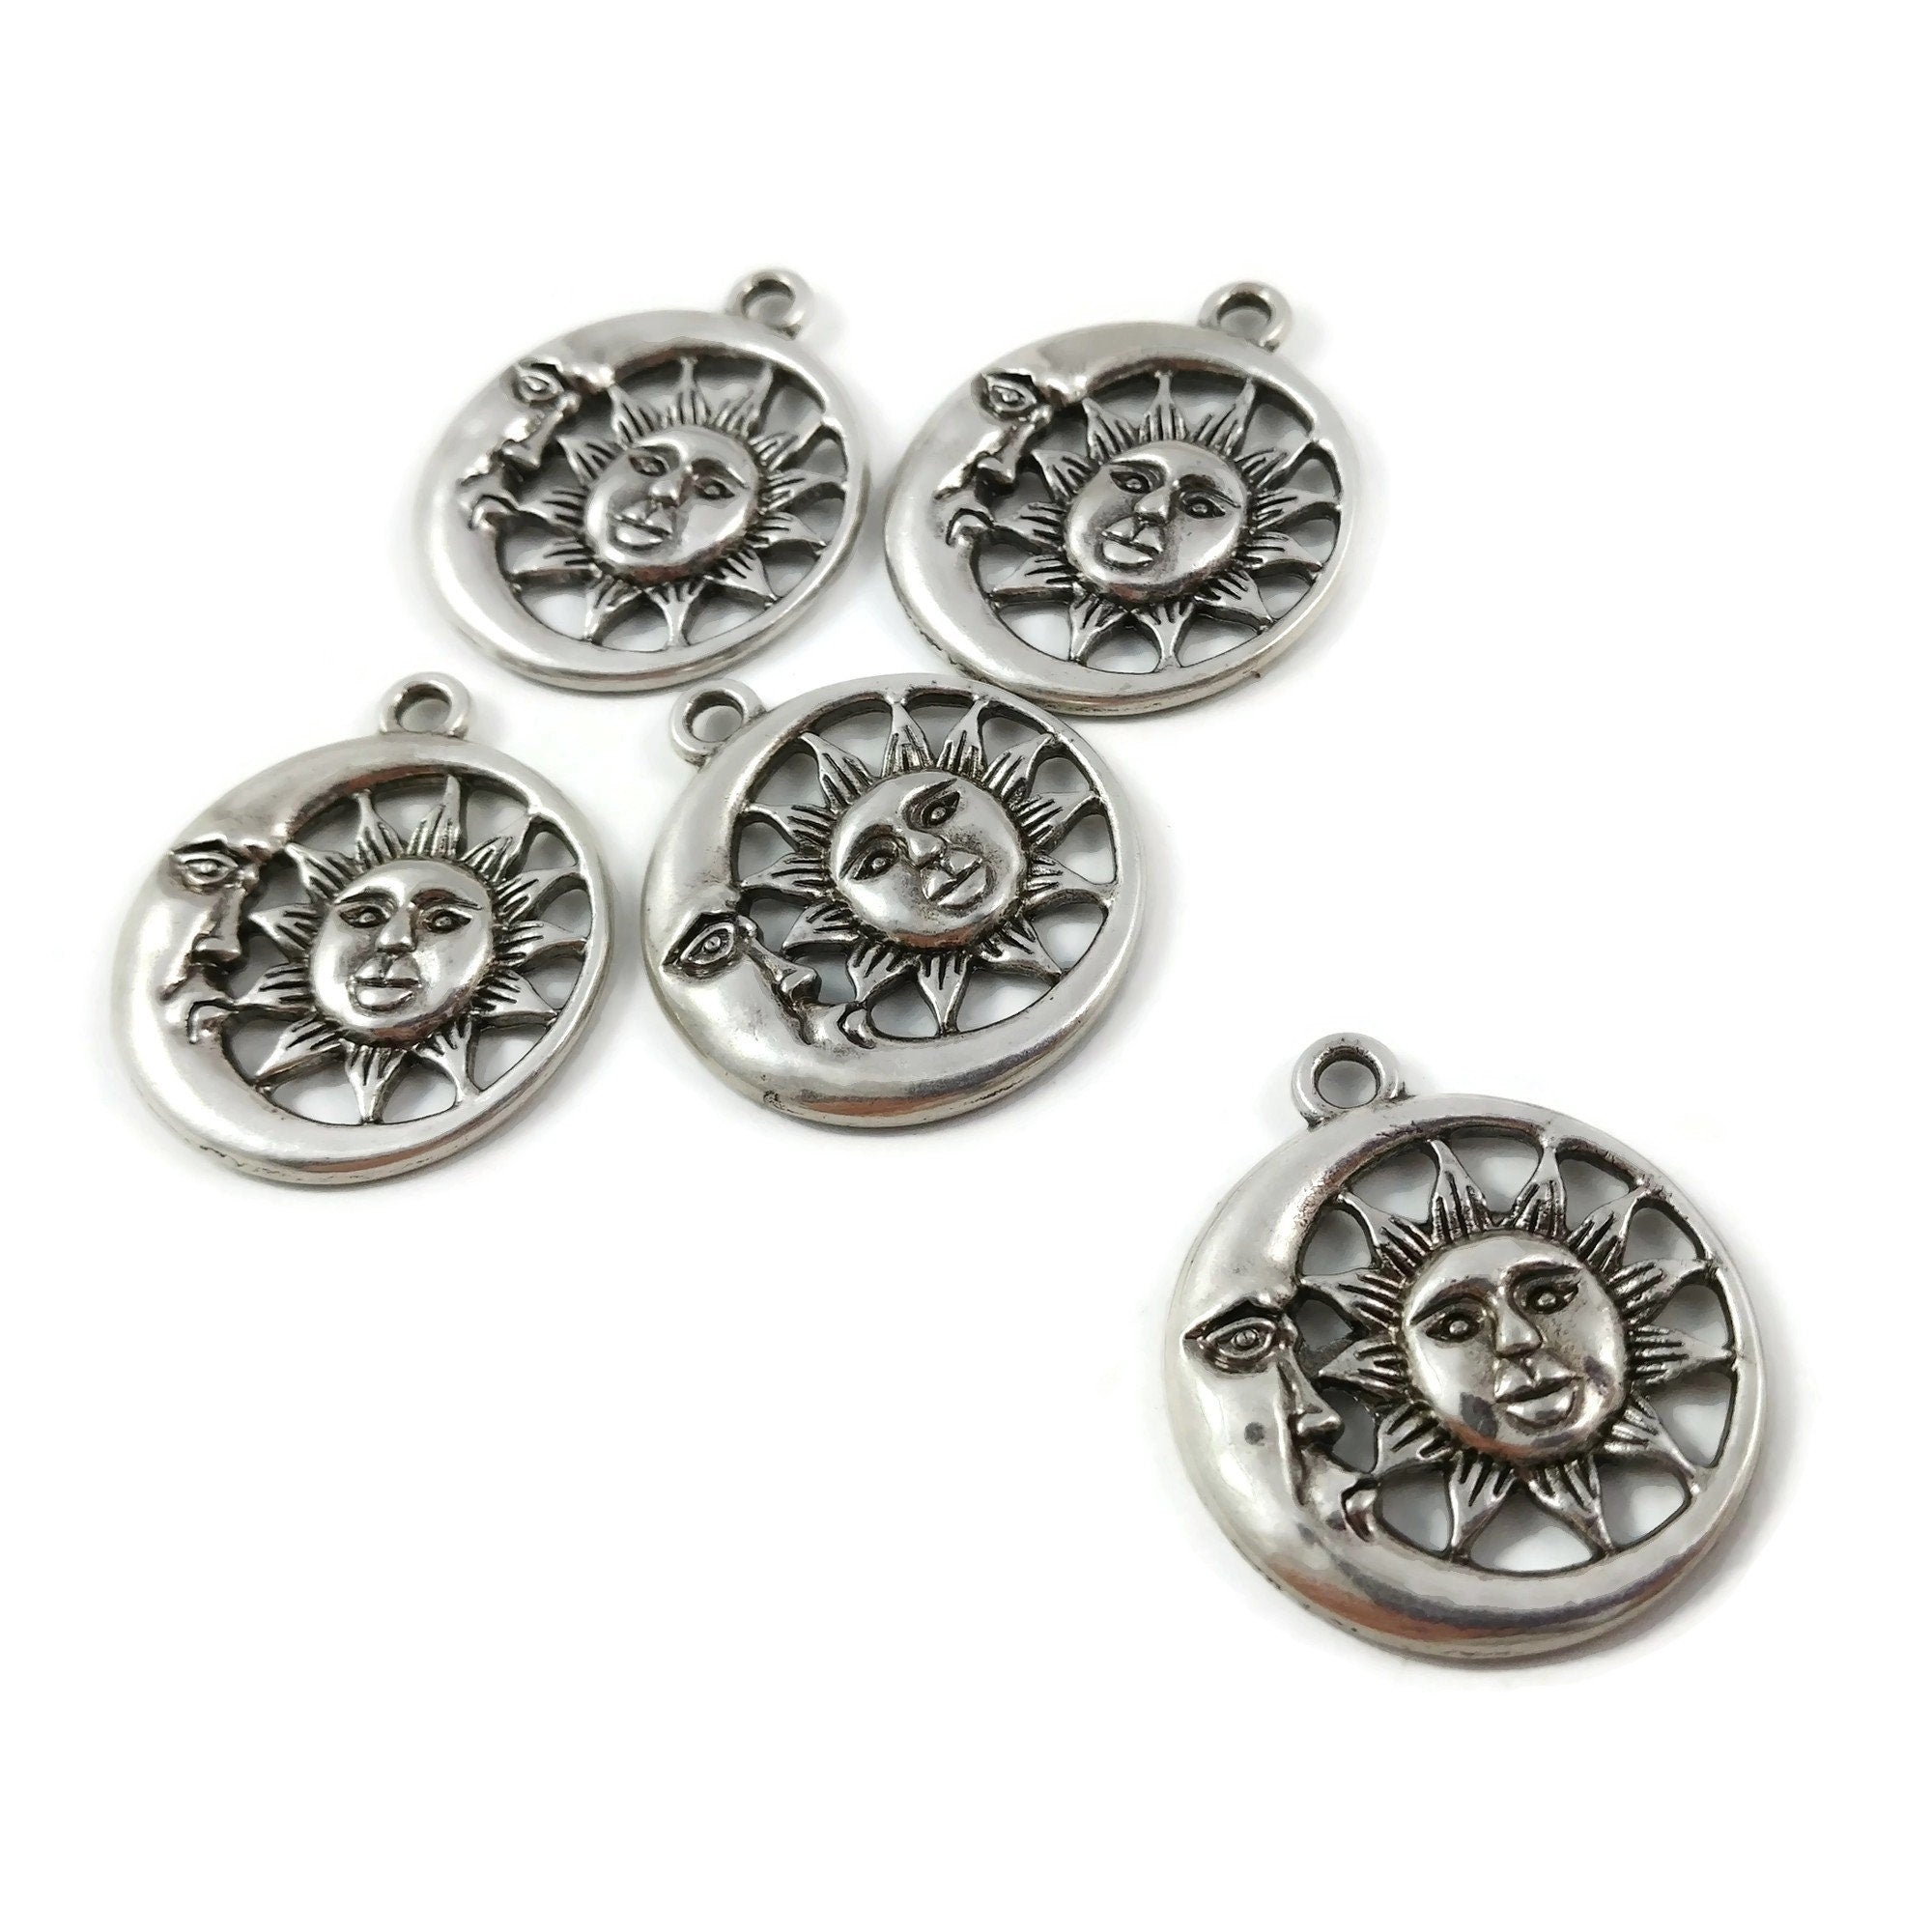 5 sun and moon charms, 30mm nickel free metal pendants, 3D charms for jewelry making